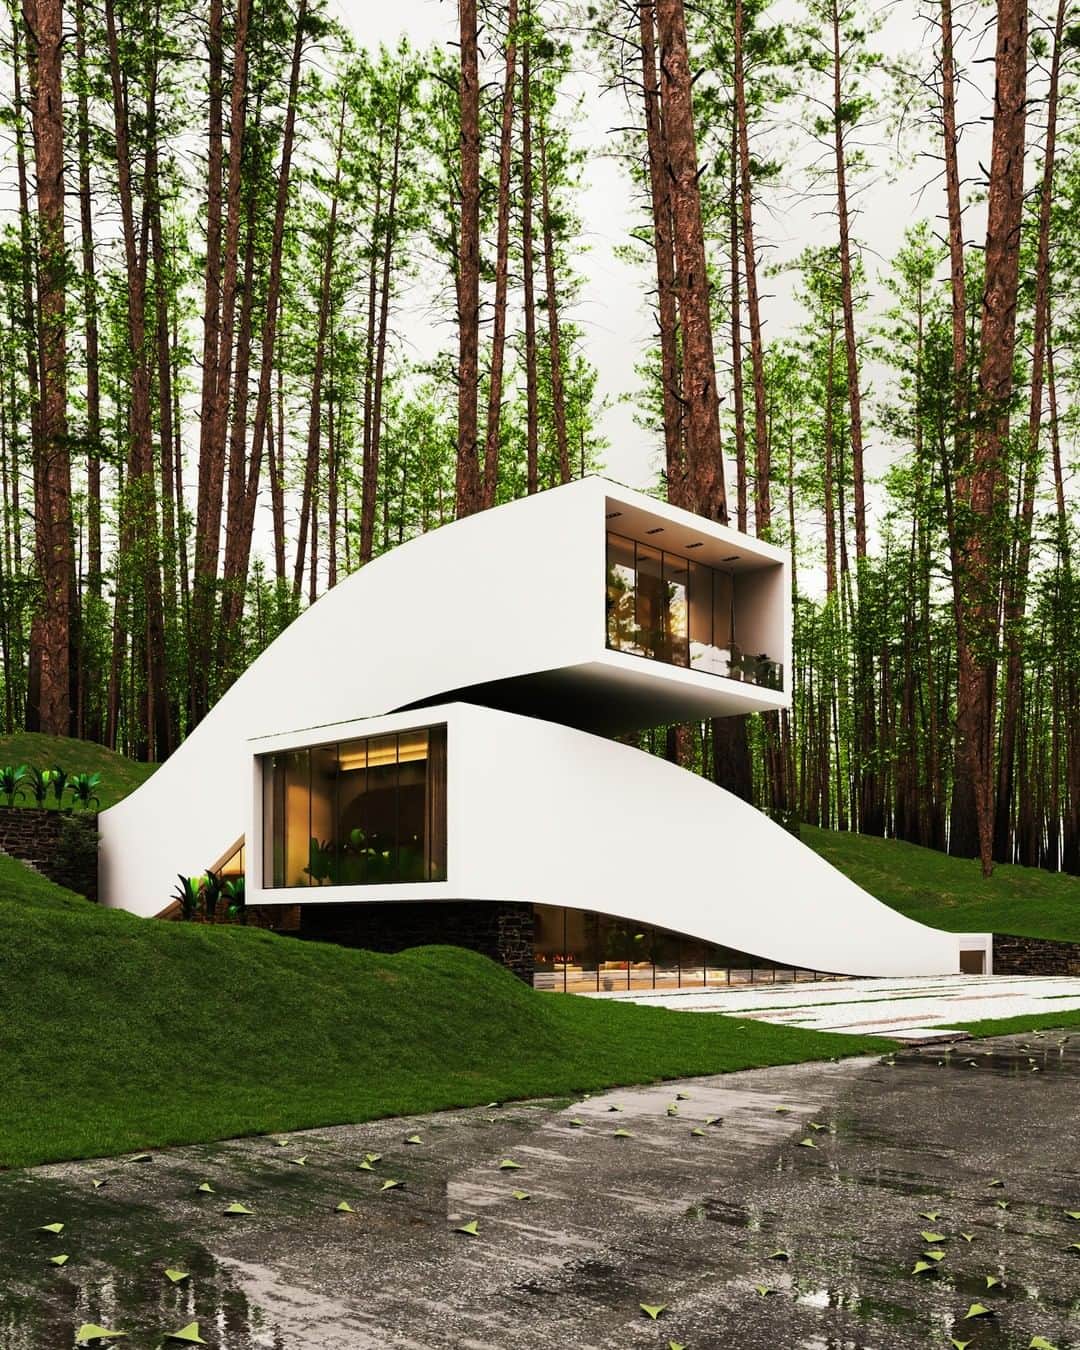 Architecture - Housesのインスタグラム：「⁣ 𝗜𝗺𝗽𝗿𝗲𝘀𝘀𝗶𝘃𝗲 𝗿𝗲𝘀𝗶𝗱𝗲𝗻𝘁𝗶𝗮𝗹 𝗽𝗿𝗼𝗽𝗲𝗿𝘁𝘆 𝗶𝗻 𝗦𝘄𝗶𝘁𝘇𝗲𝗿𝗹𝗮𝗻𝗱⁣ ⁣ One of the keys of this project is how the green earth covers the roof of the facade. The result is a more striking visual effect.⁣ ⁣ The skylights and windows inside are the most characteristic elements of this house, letting in light in and allowing fabulous views.⁣ ⁣ The unique details of this project? The swimming pool and the cinema room. Swipe left and find them. Amazing! ➡️➡️⁣ _____⁣⁣⁣⁣⁣⁣⁣⁣⁣⁣⁣ 📐@miladeshtiyaghi 📍Switzerland ⁣ #archidesignhome⁣⁣⁣⁣⁣⁣⁣ _____⁣⁣⁣⁣⁣⁣⁣⁣⁣⁣⁣ #design #architecture #architect #arquitectura #luxury #architettura #archilovers ‎#architecturephotography #amazingarchitecture⁣ #lookingup_architecture #artdepartment #architecturallighting #house #archimodel #architecture_addicted #architecturedaily #arqlovers #Switzerland」